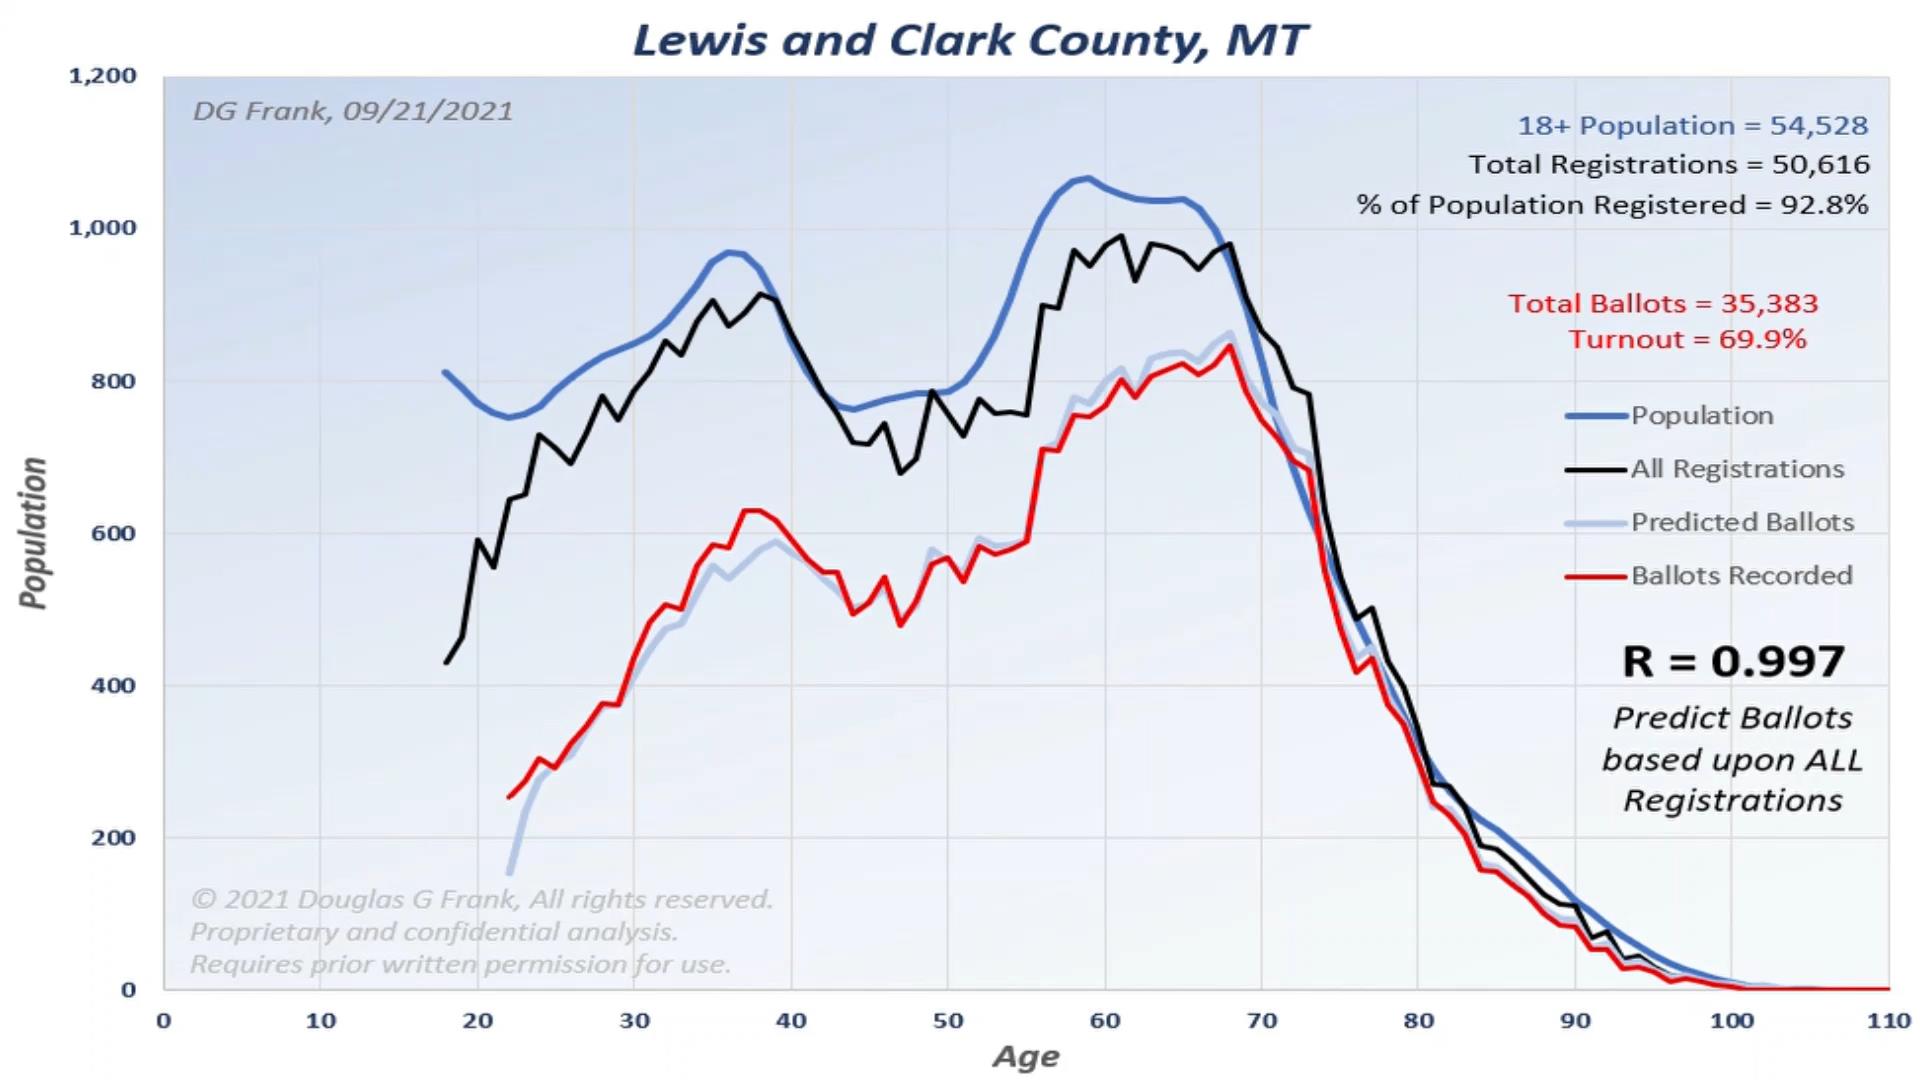 Lewis and Clark County 2020 Election Analysis Chart by Dr. Doug Frank